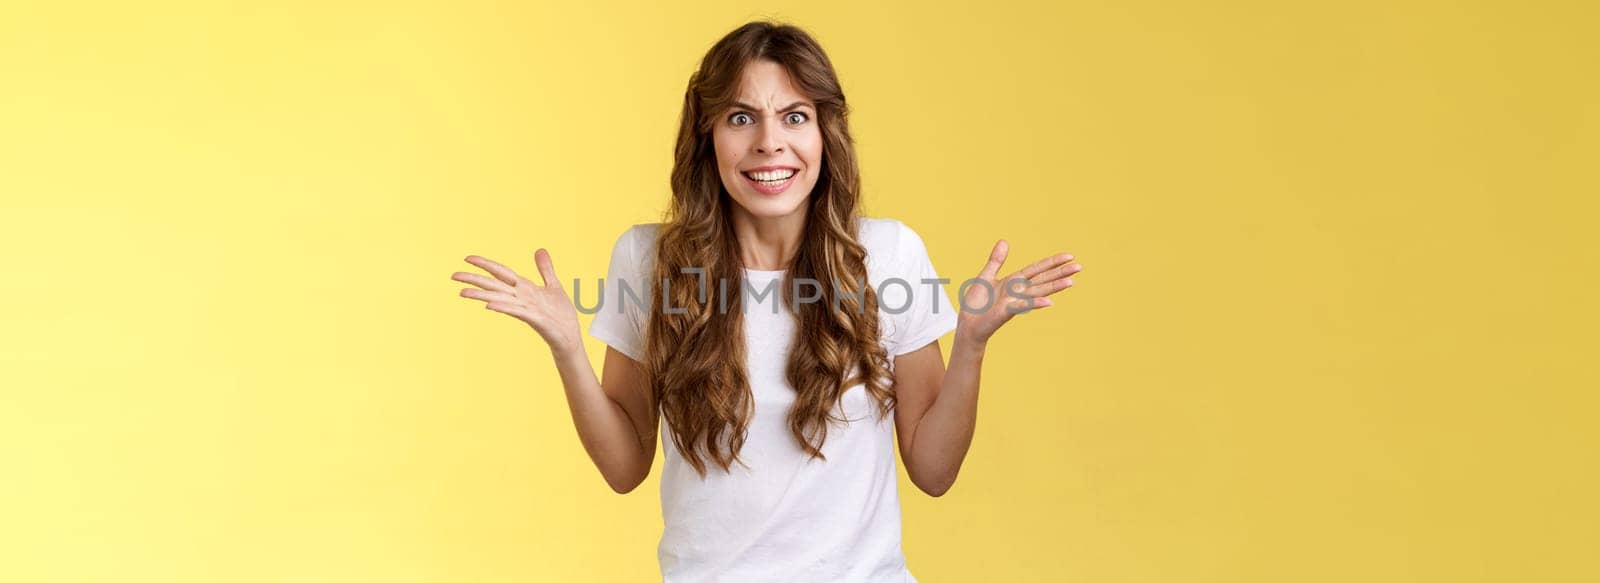 Angry freaked out disappointed woman frowning grimacing anger distress raise hands sideways full dismay complaining being rude arguing look pissed outraged swearing frustrated yellow background by Benzoix